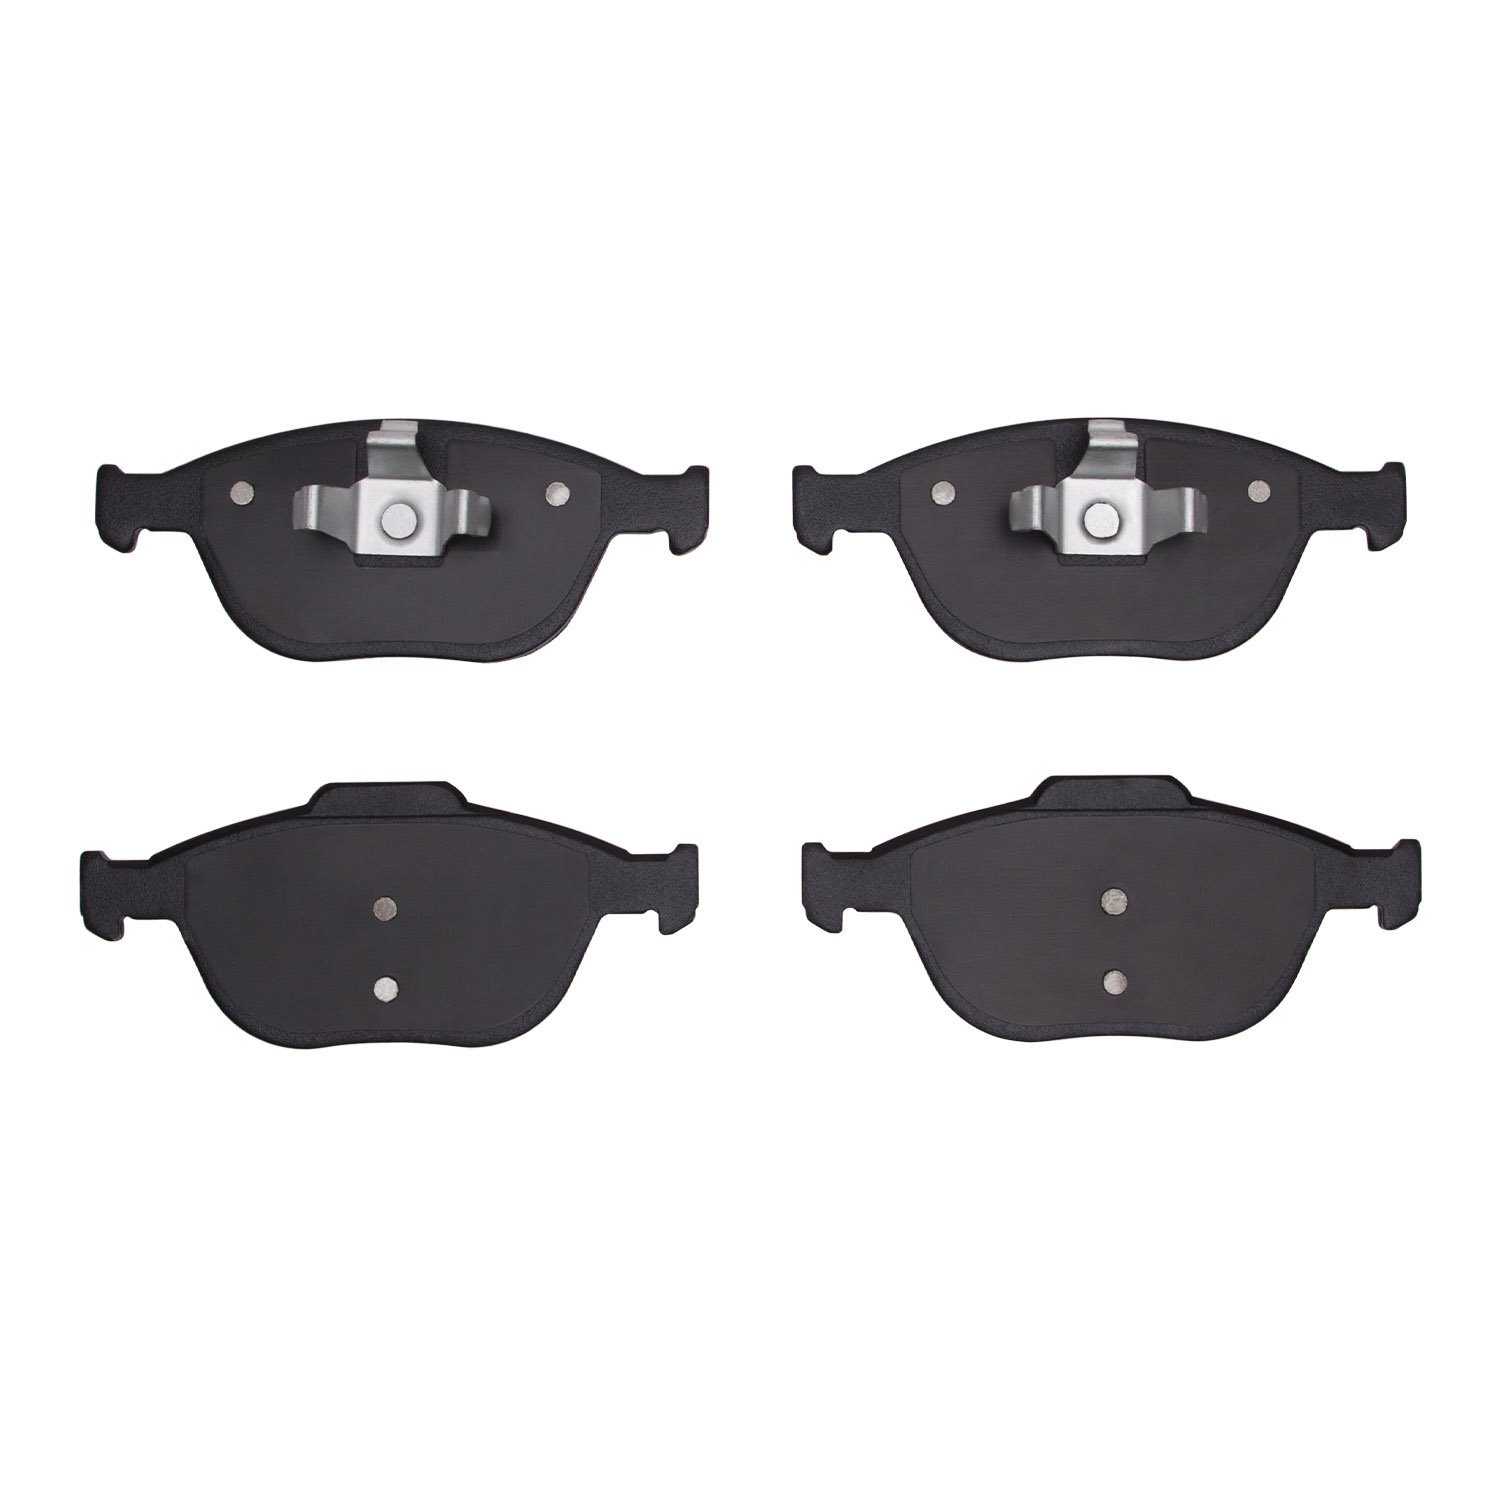 1551-0970-00 5000 Advanced Low-Metallic Brake Pads, 2002-2013 Ford/Lincoln/Mercury/Mazda, Position: Front